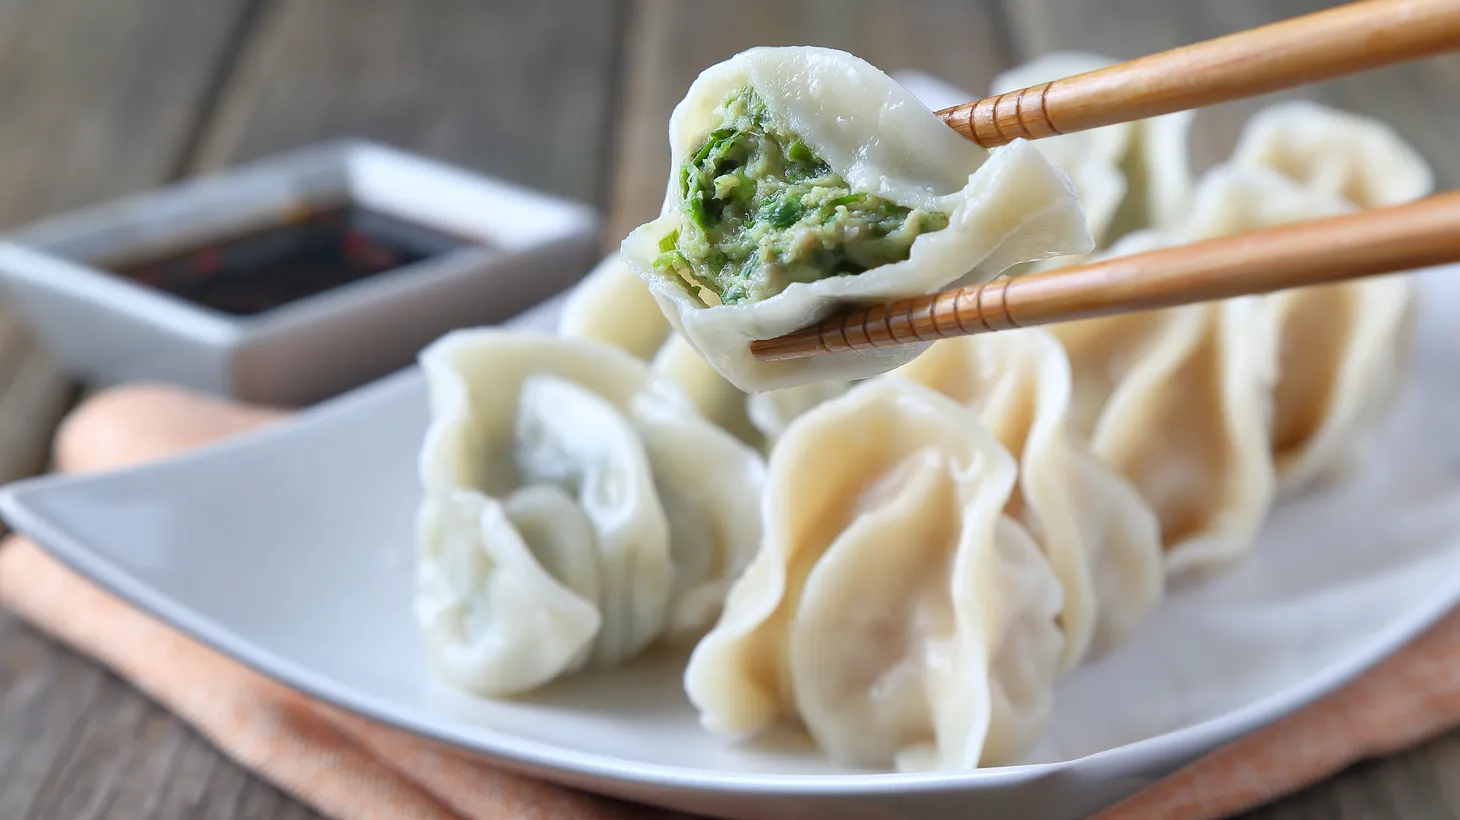 “Just ask your waiter to make some recommendations because they've got every dumpling imaginable,” Mona Holmes says of Xiao Long Dumplings in Las Vegas.